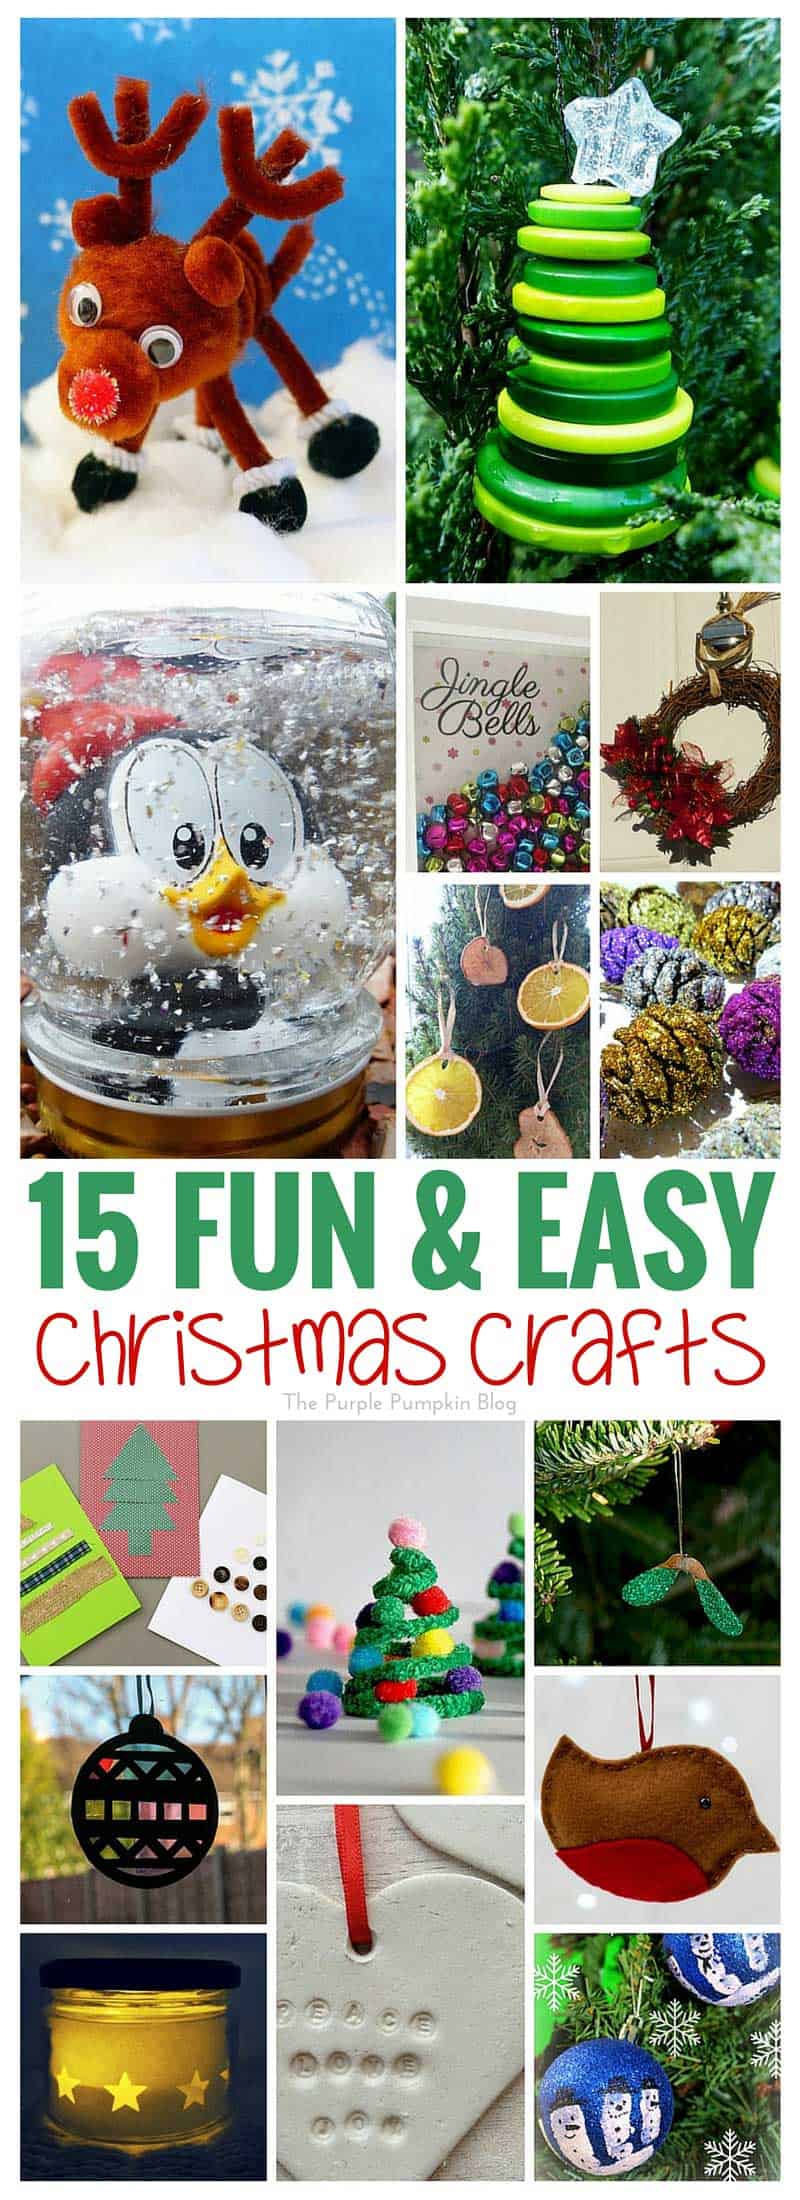 15 Fun + Easy Christmas Crafts - lots of great ideas to get crafty for the festive season!